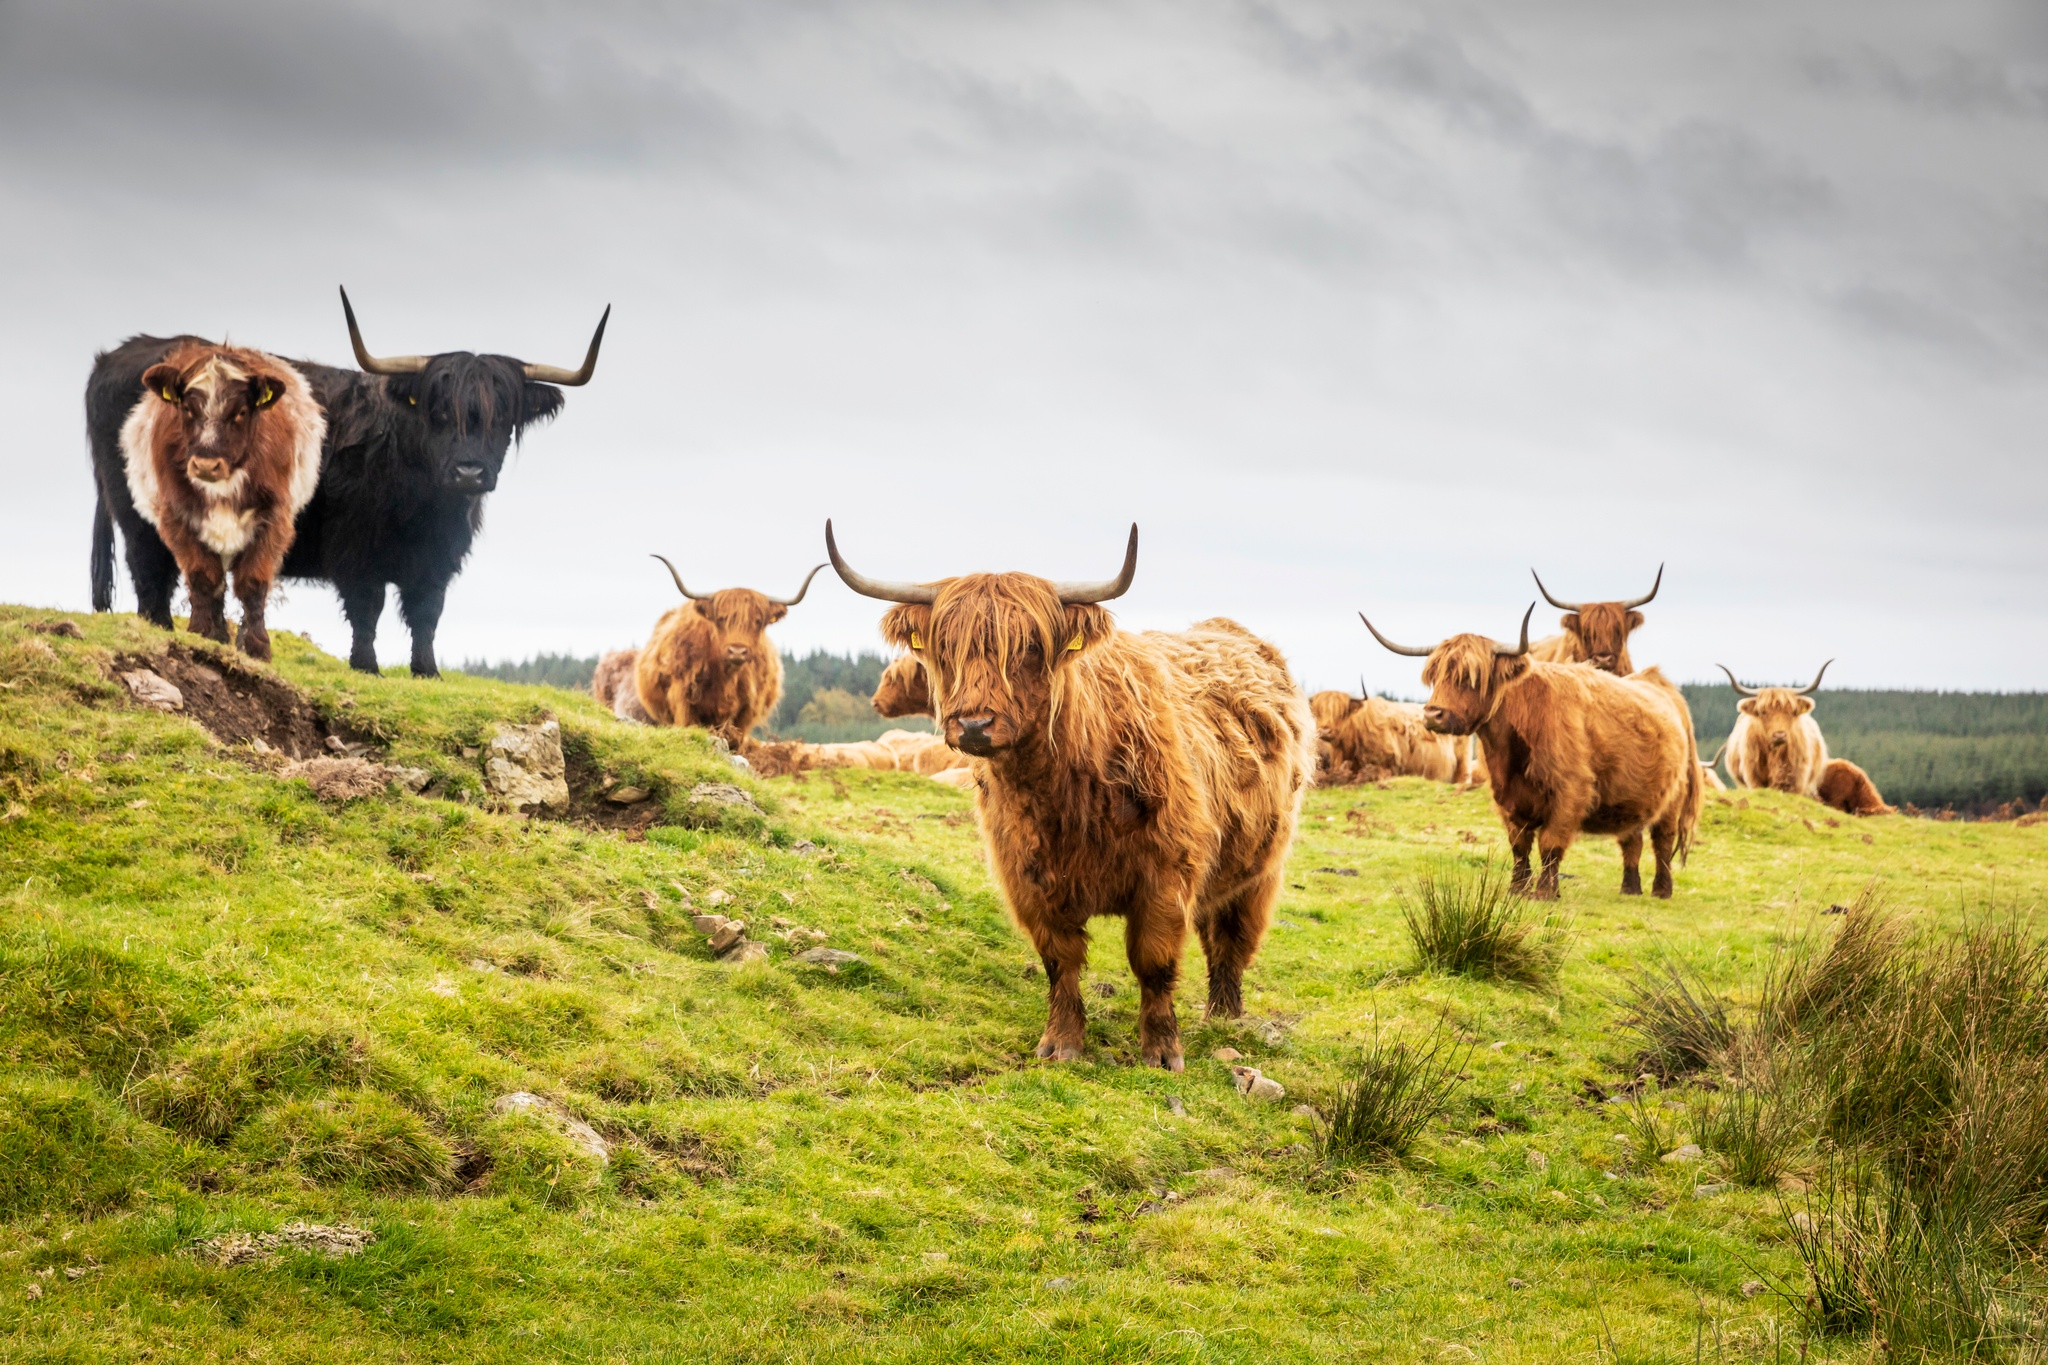 What's #coosday? - News | VisitScotland.org